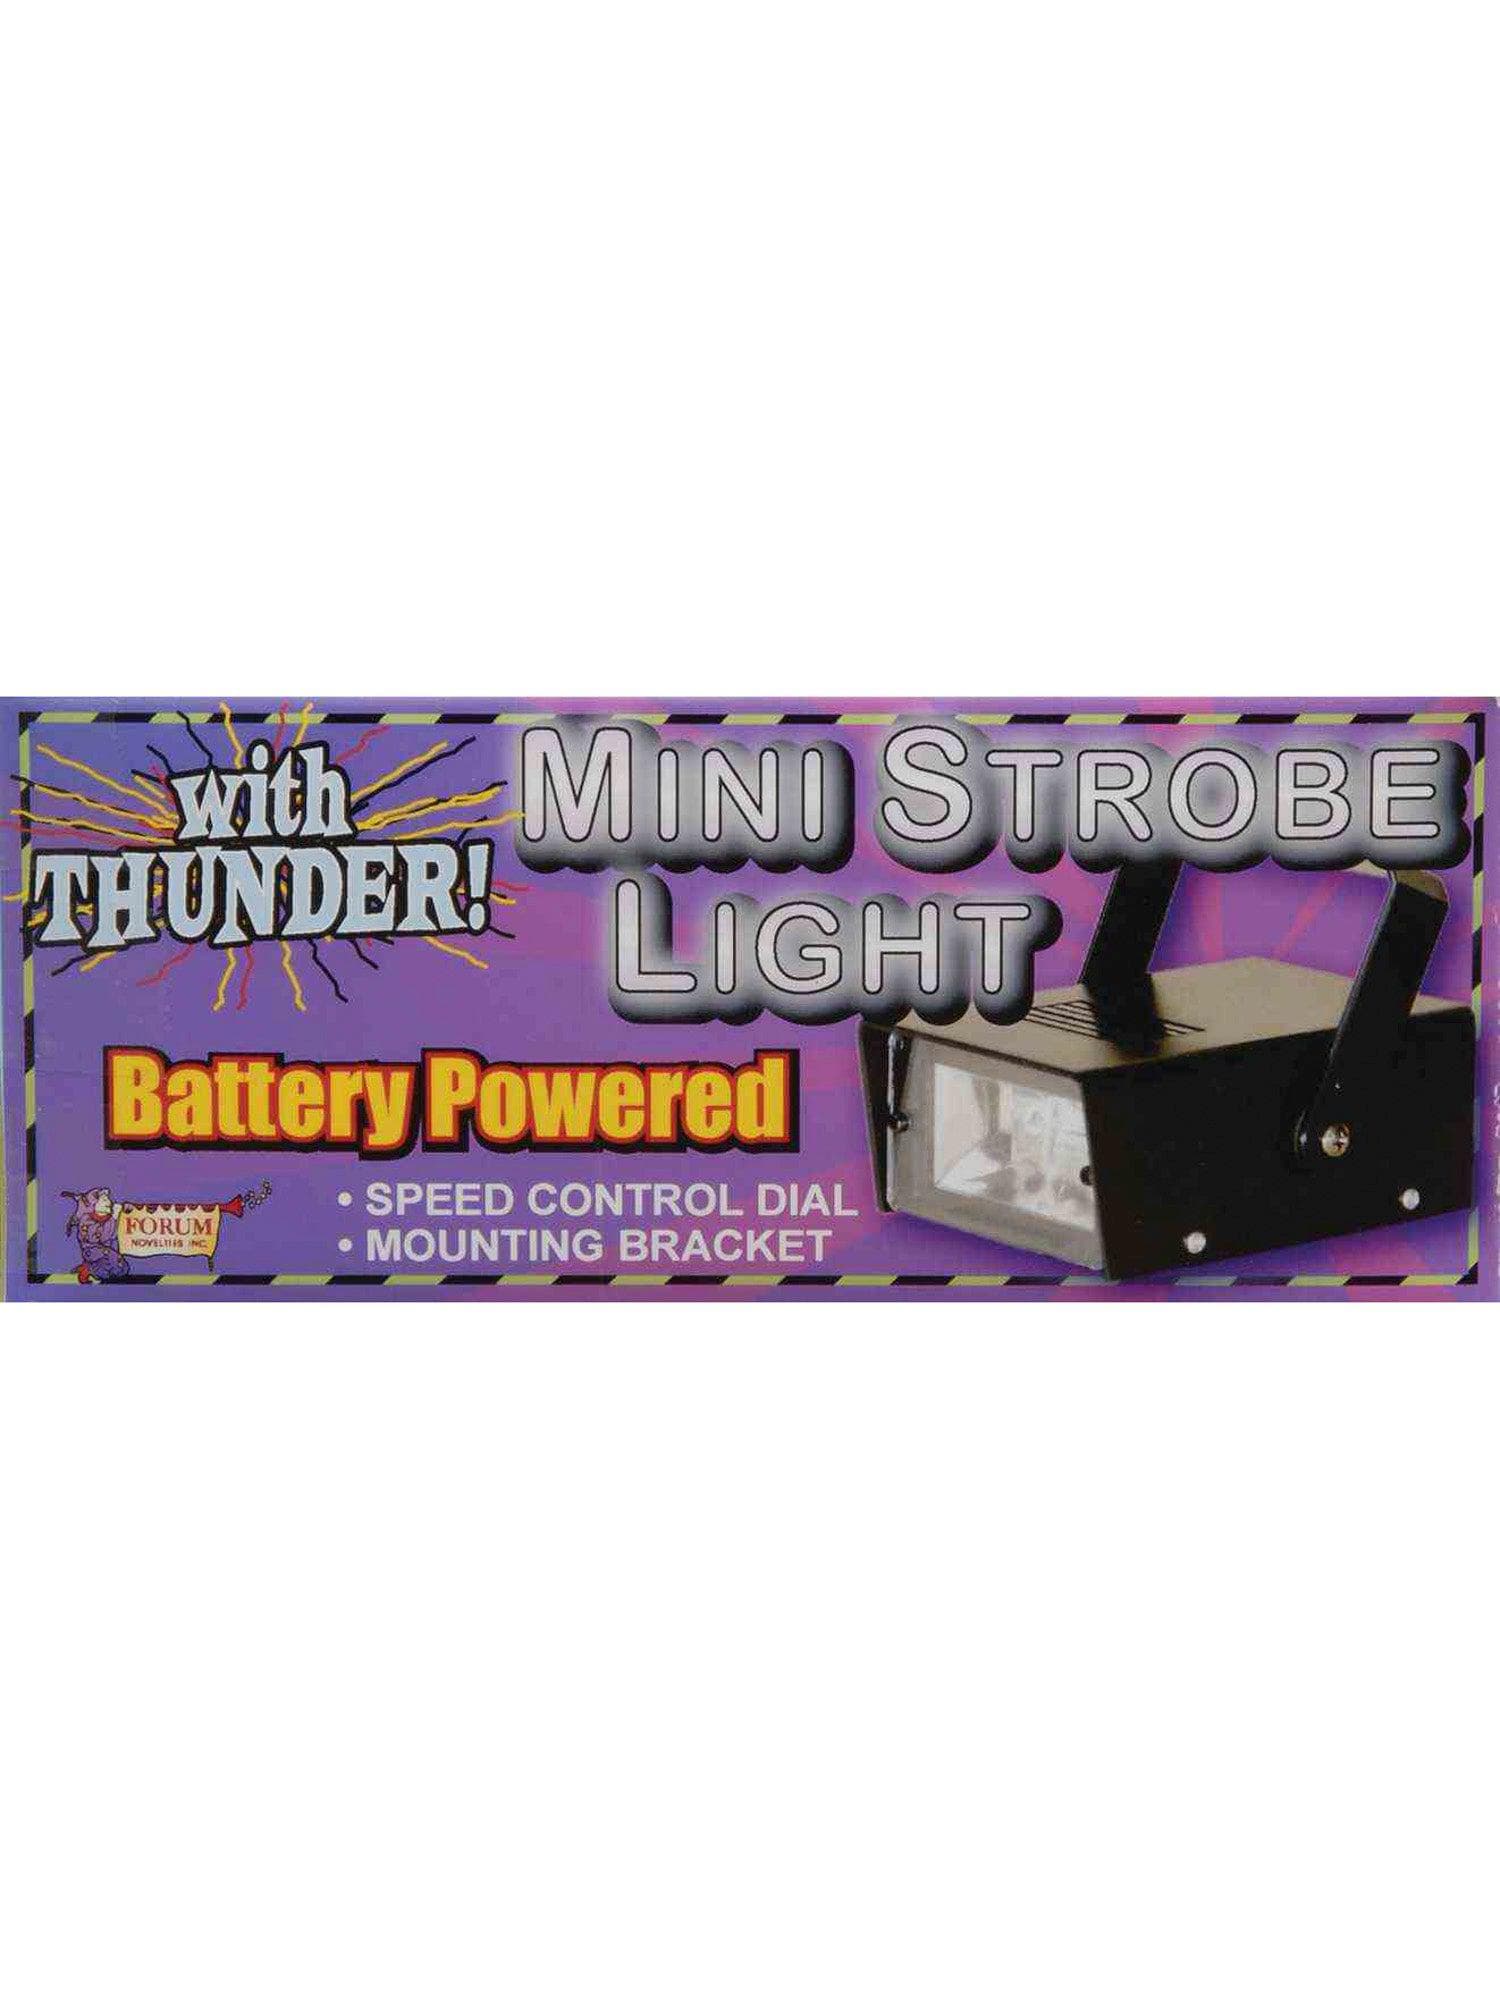 Mini Strobe Light with Thunder Sound Effects - costumes.com